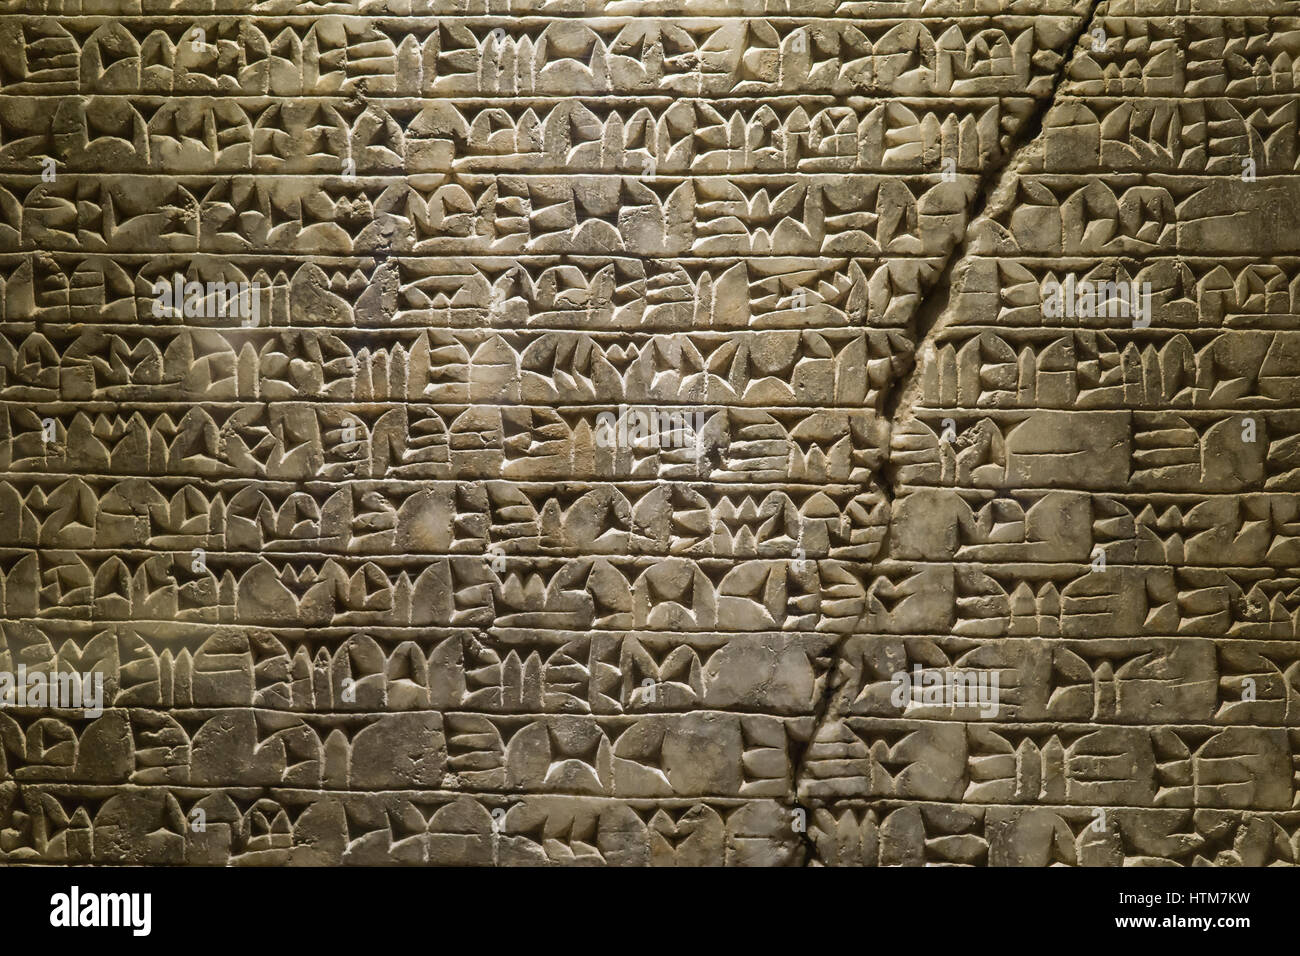 Assyrian Reliefs at the Vatican museum, Inscription of Sargon II(721-705 B.C.) fron the inner court of Sargon palace at Khorsabad,Neo-Assyrian period. Stock Photo